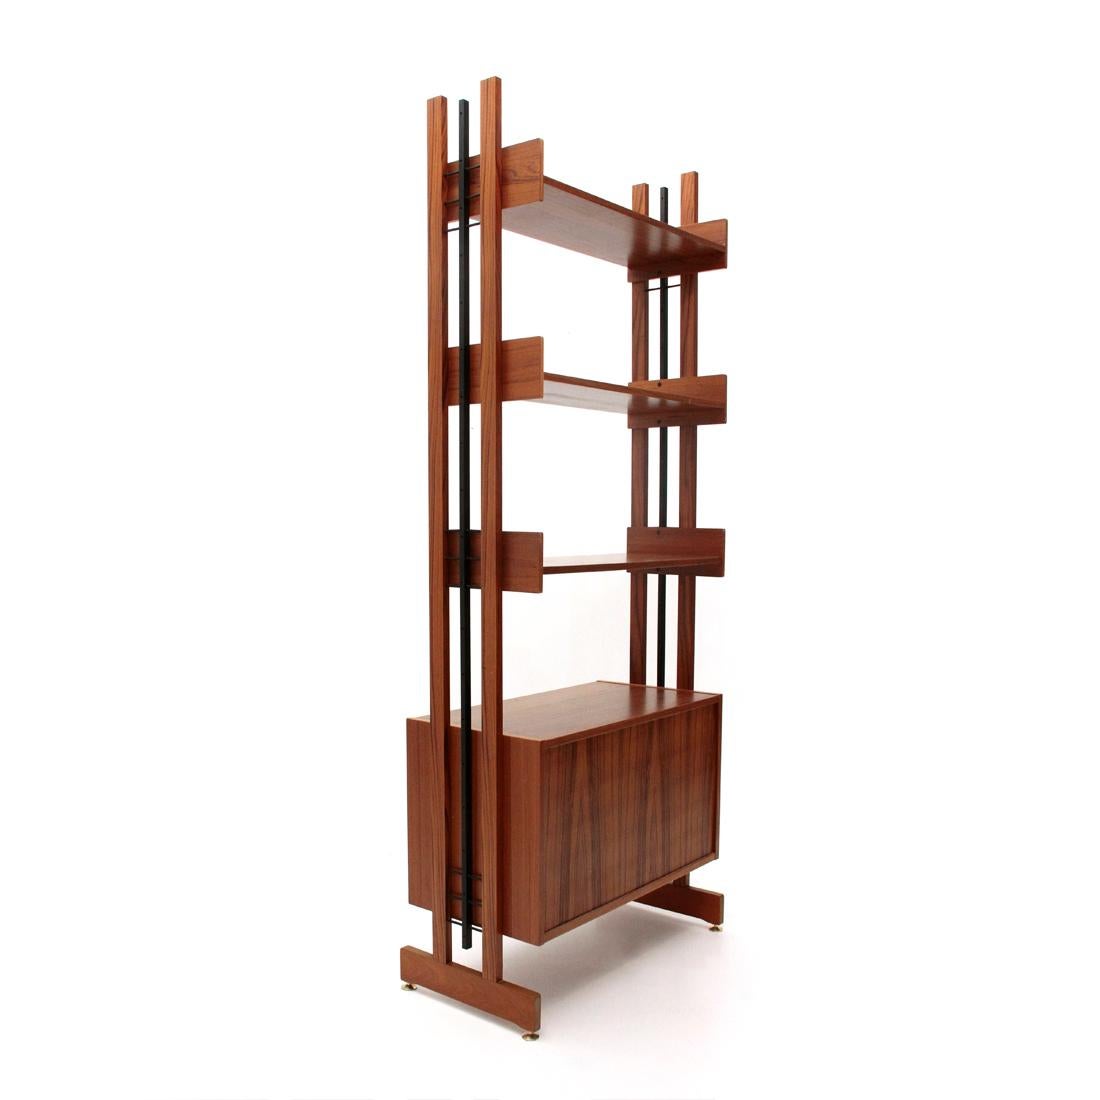 Italian manufacture wall unit produced in the 1960s.
Uprights in teak and black painted metal, height adjustable brass feet.
Teak veneered wood container and handles in black painted metal, inside shelf.
Shelves in teak veneered wood and plywood